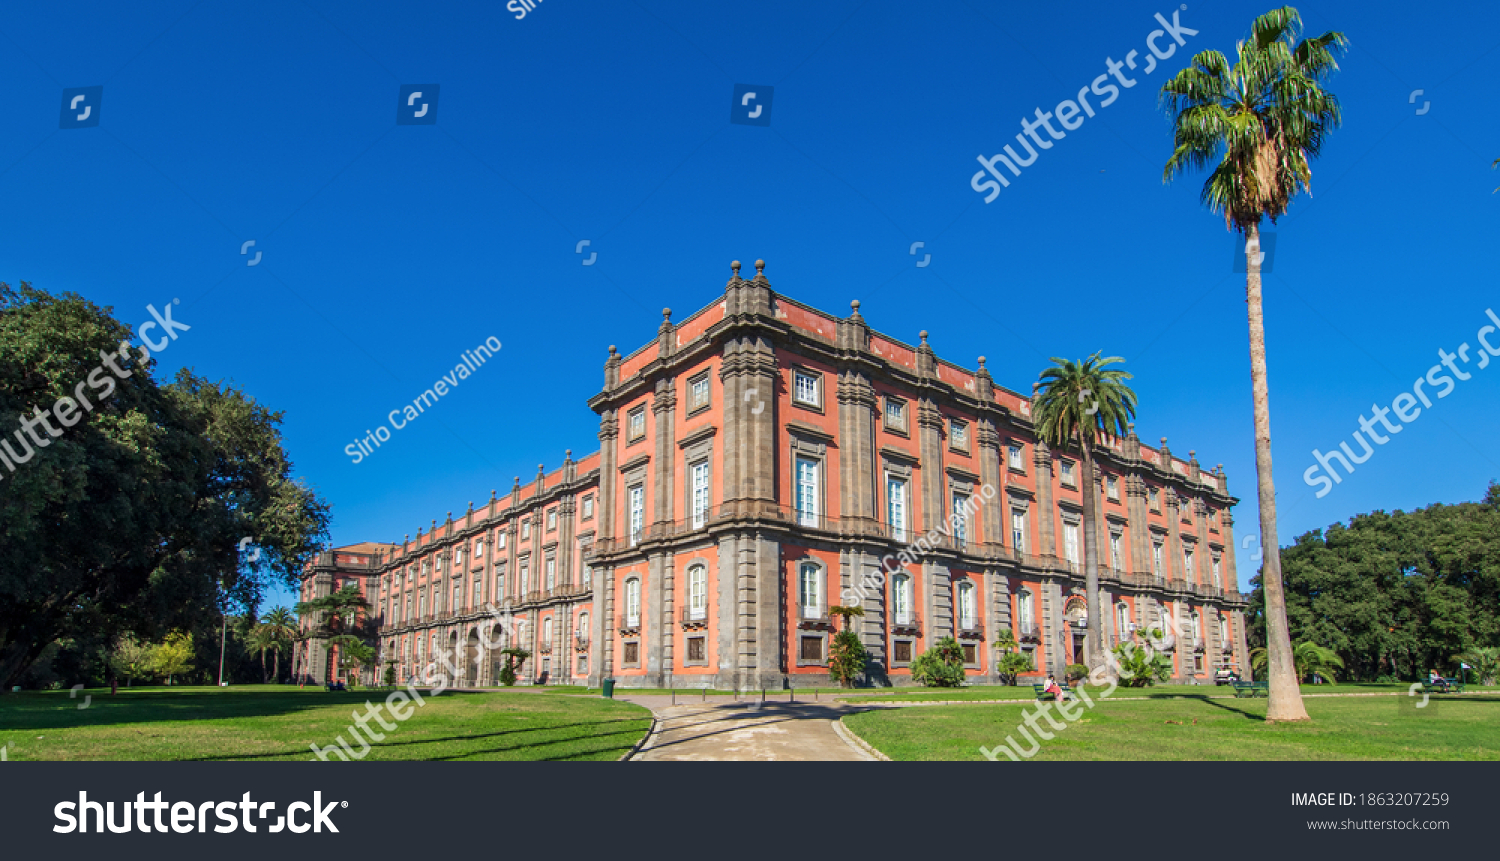 Naples, Italy - built in 1742, and located on the top of the Capidimonte district, the Palace of Capodimonte is a fine example of Bourbon palazzo, and one of the main landmarks in Naples #1863207259